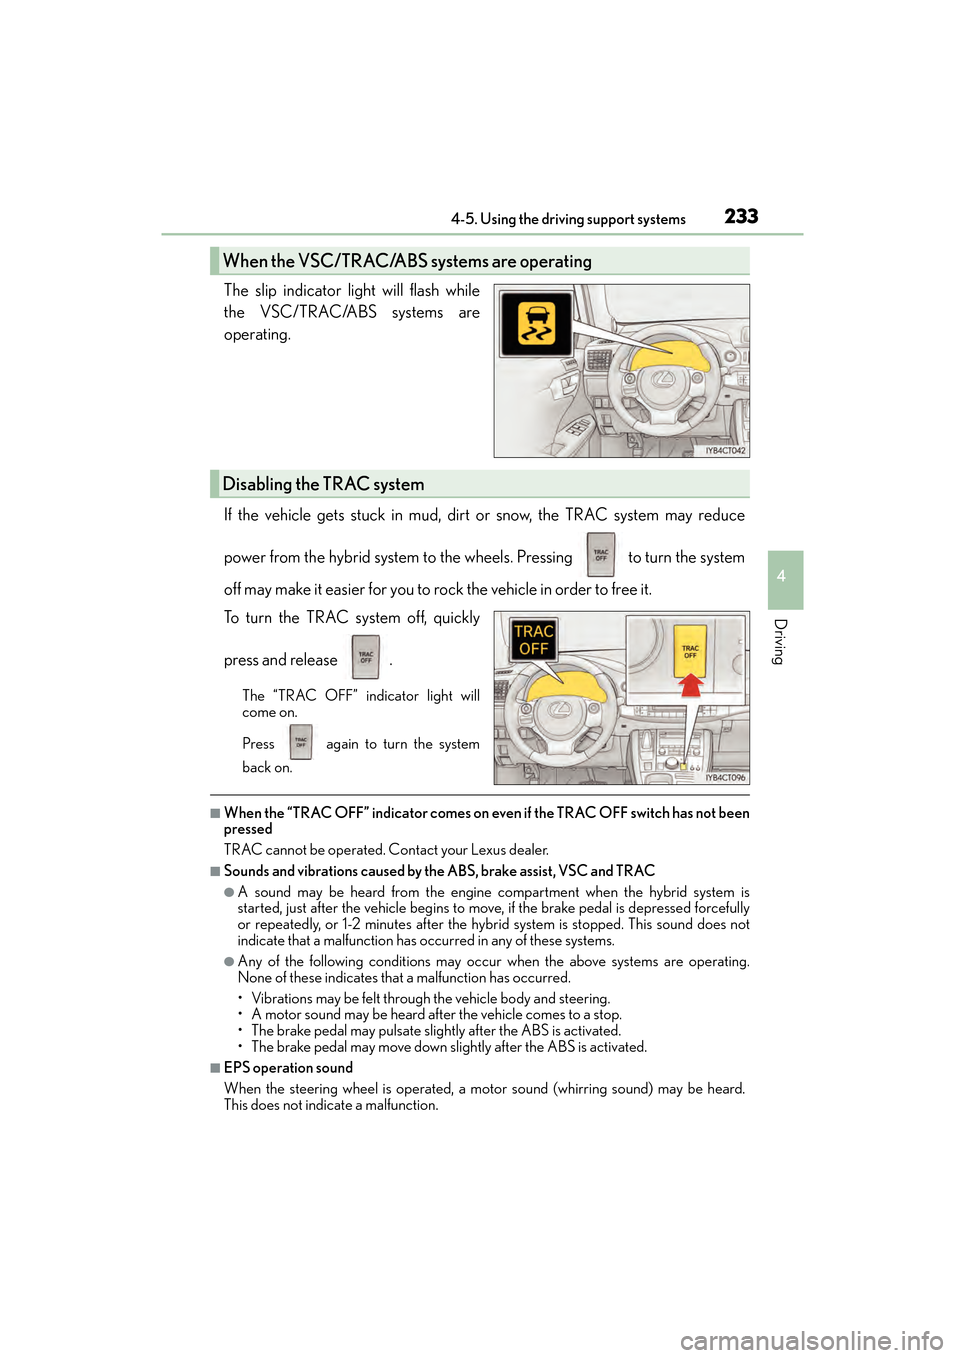 Lexus CT200h 2015  Owners Manual (in English) CT200h_OM_OM76174U_(U)
2334-5. Using the driving support systems
4
Driving
The slip indicator light will flash while
the VSC/TRAC/ABS systems are
operating.
If the vehicle gets stuck in mud, dirt or s